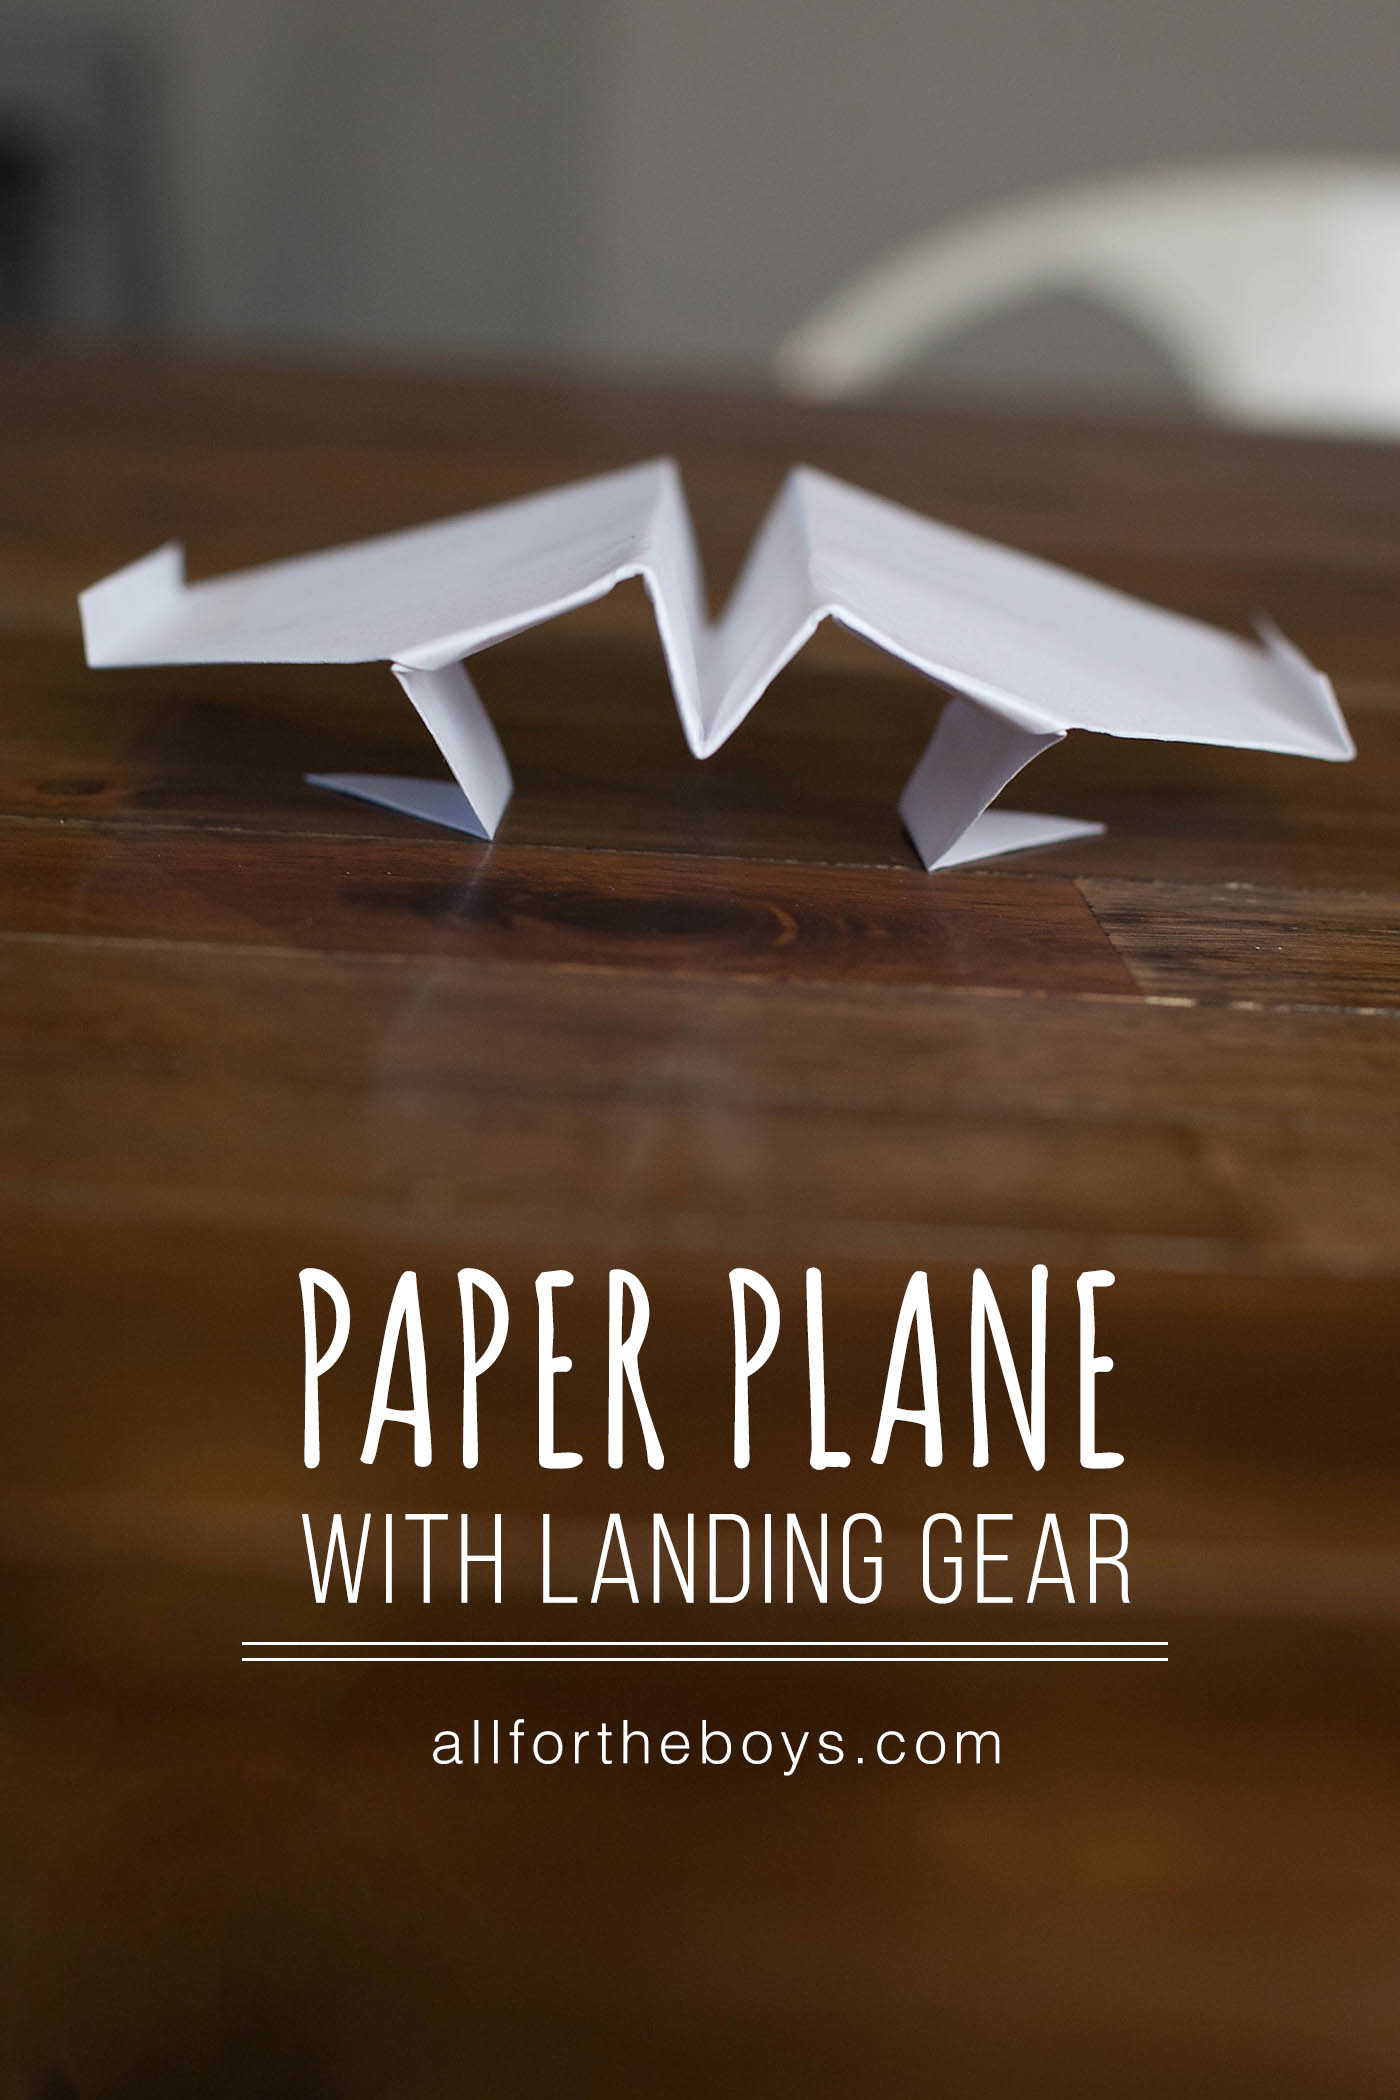 Paper plane with landing gear - how to at allfortheboys.com